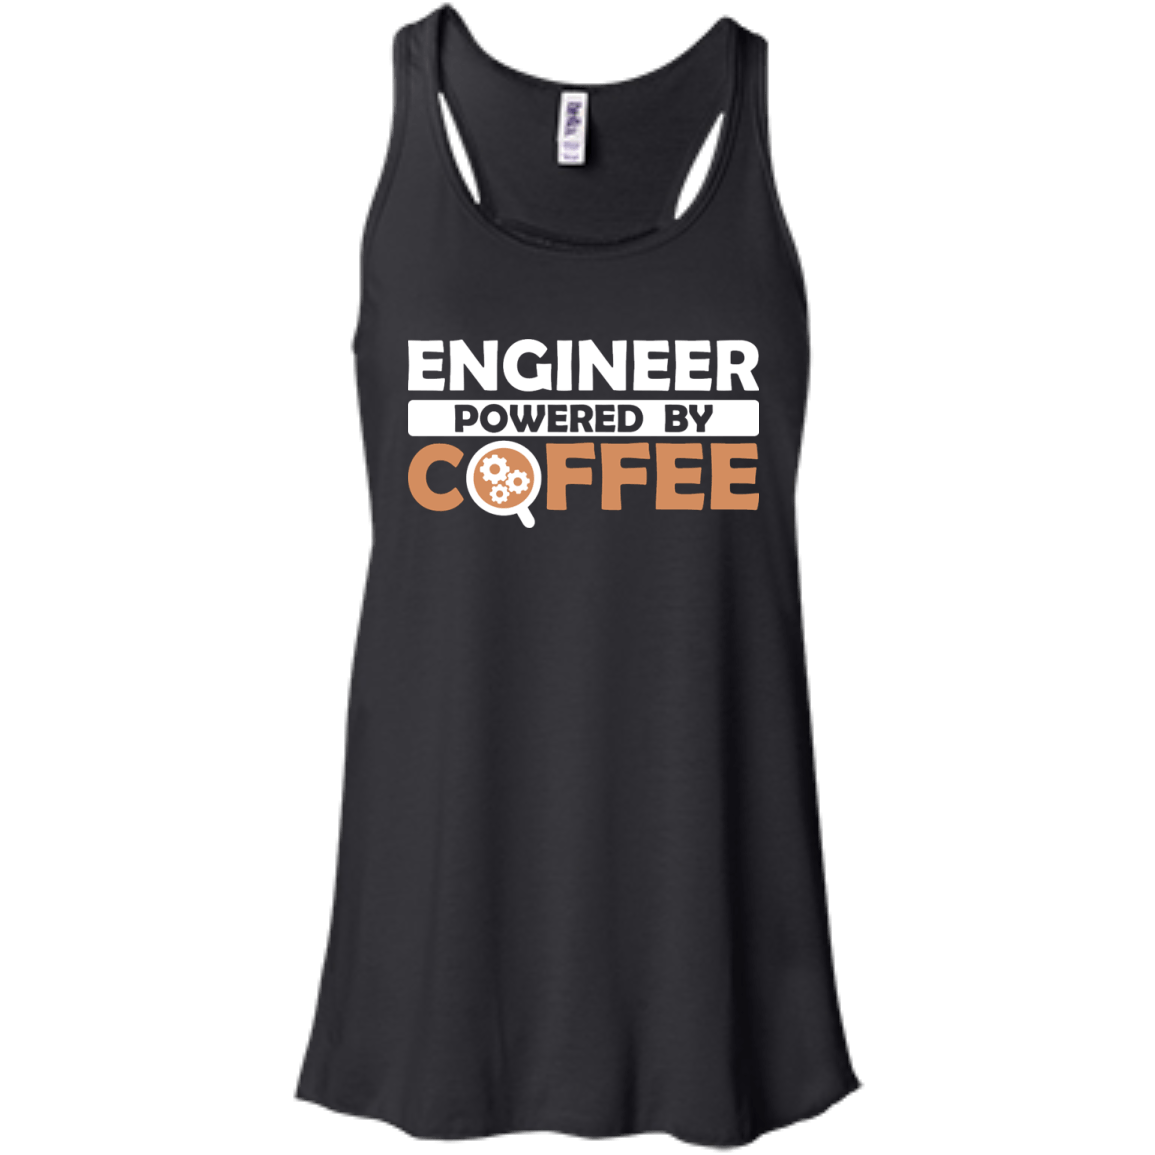 Engineer Powered By Coffee - Engineering Outfitters